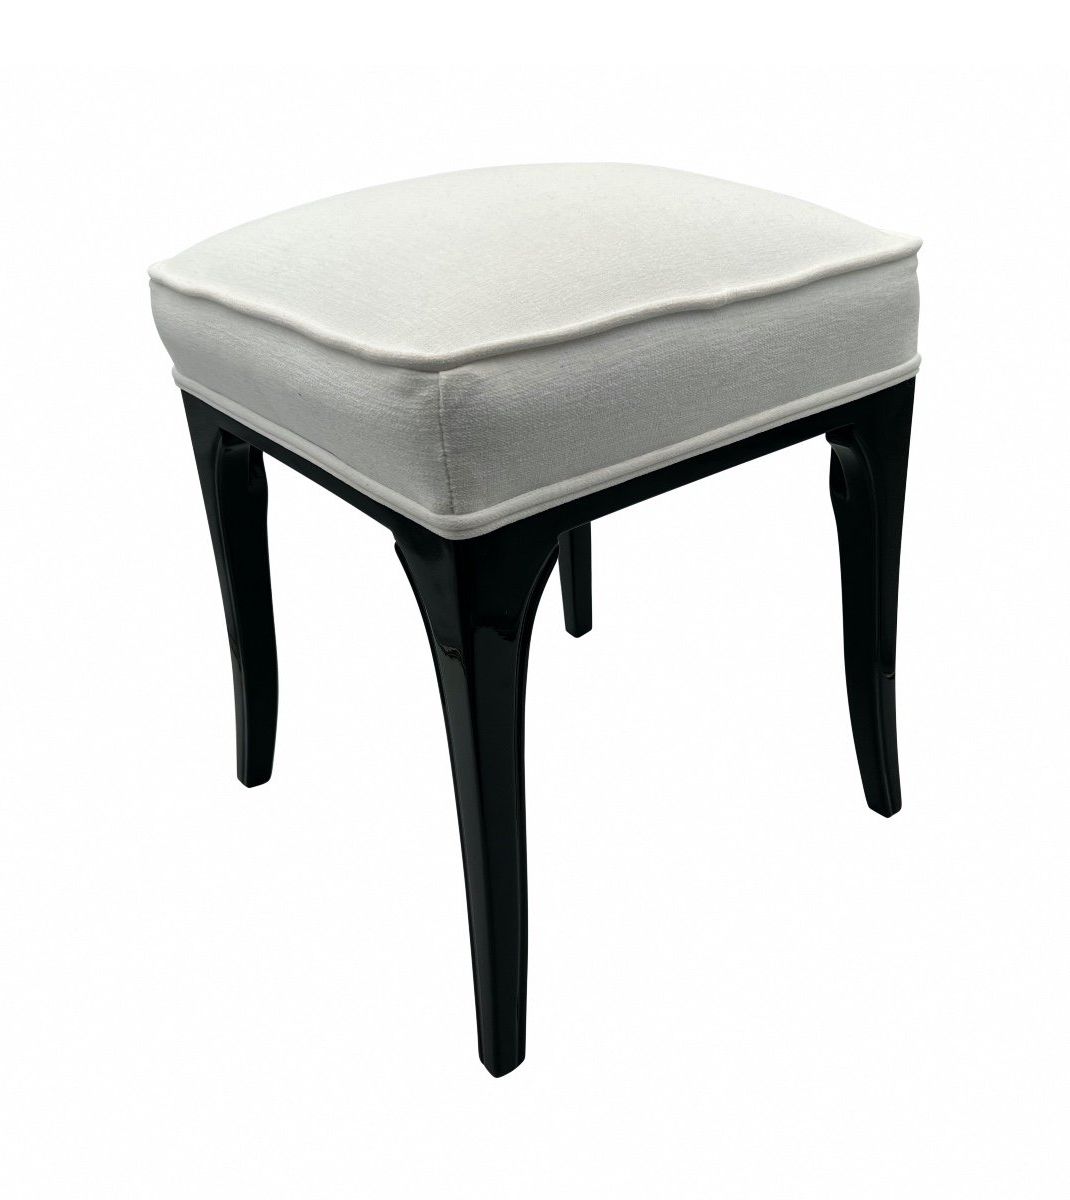 Trendy White Lacquer Ottomans With Regard To Art Deco Stool, Black Lacquered Oak, France Circa 1940 – Design Seats (View 6 of 10)